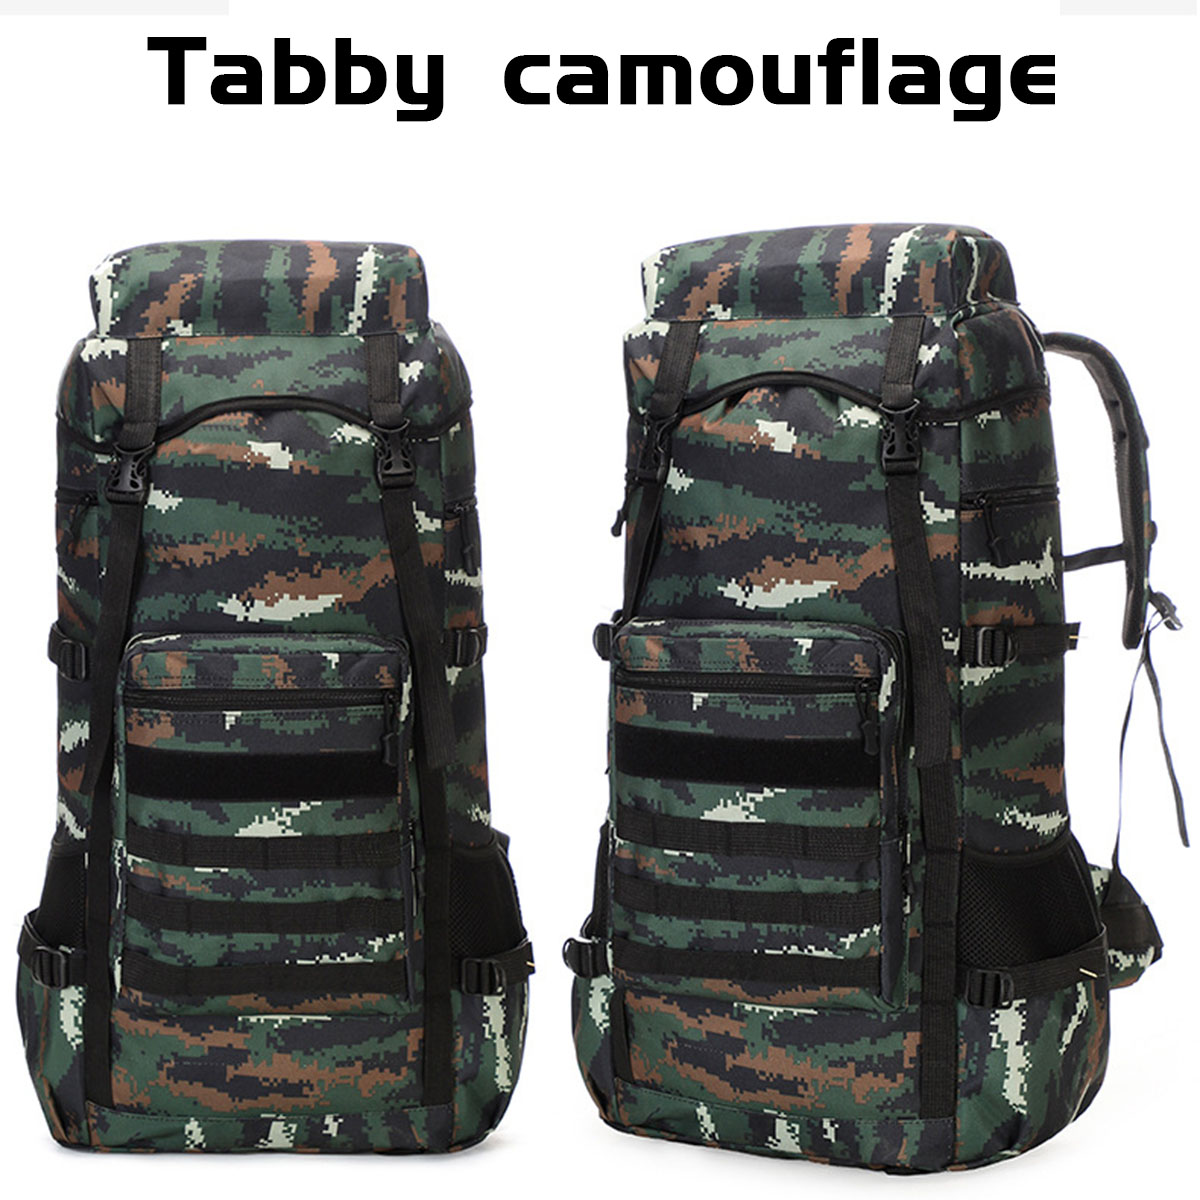 70L-Outdoor-Waterproof-Military-Tactical-Backpack-Camping-Hiking-Backpack-Trekking-Camouflage-Travel-1759458-10